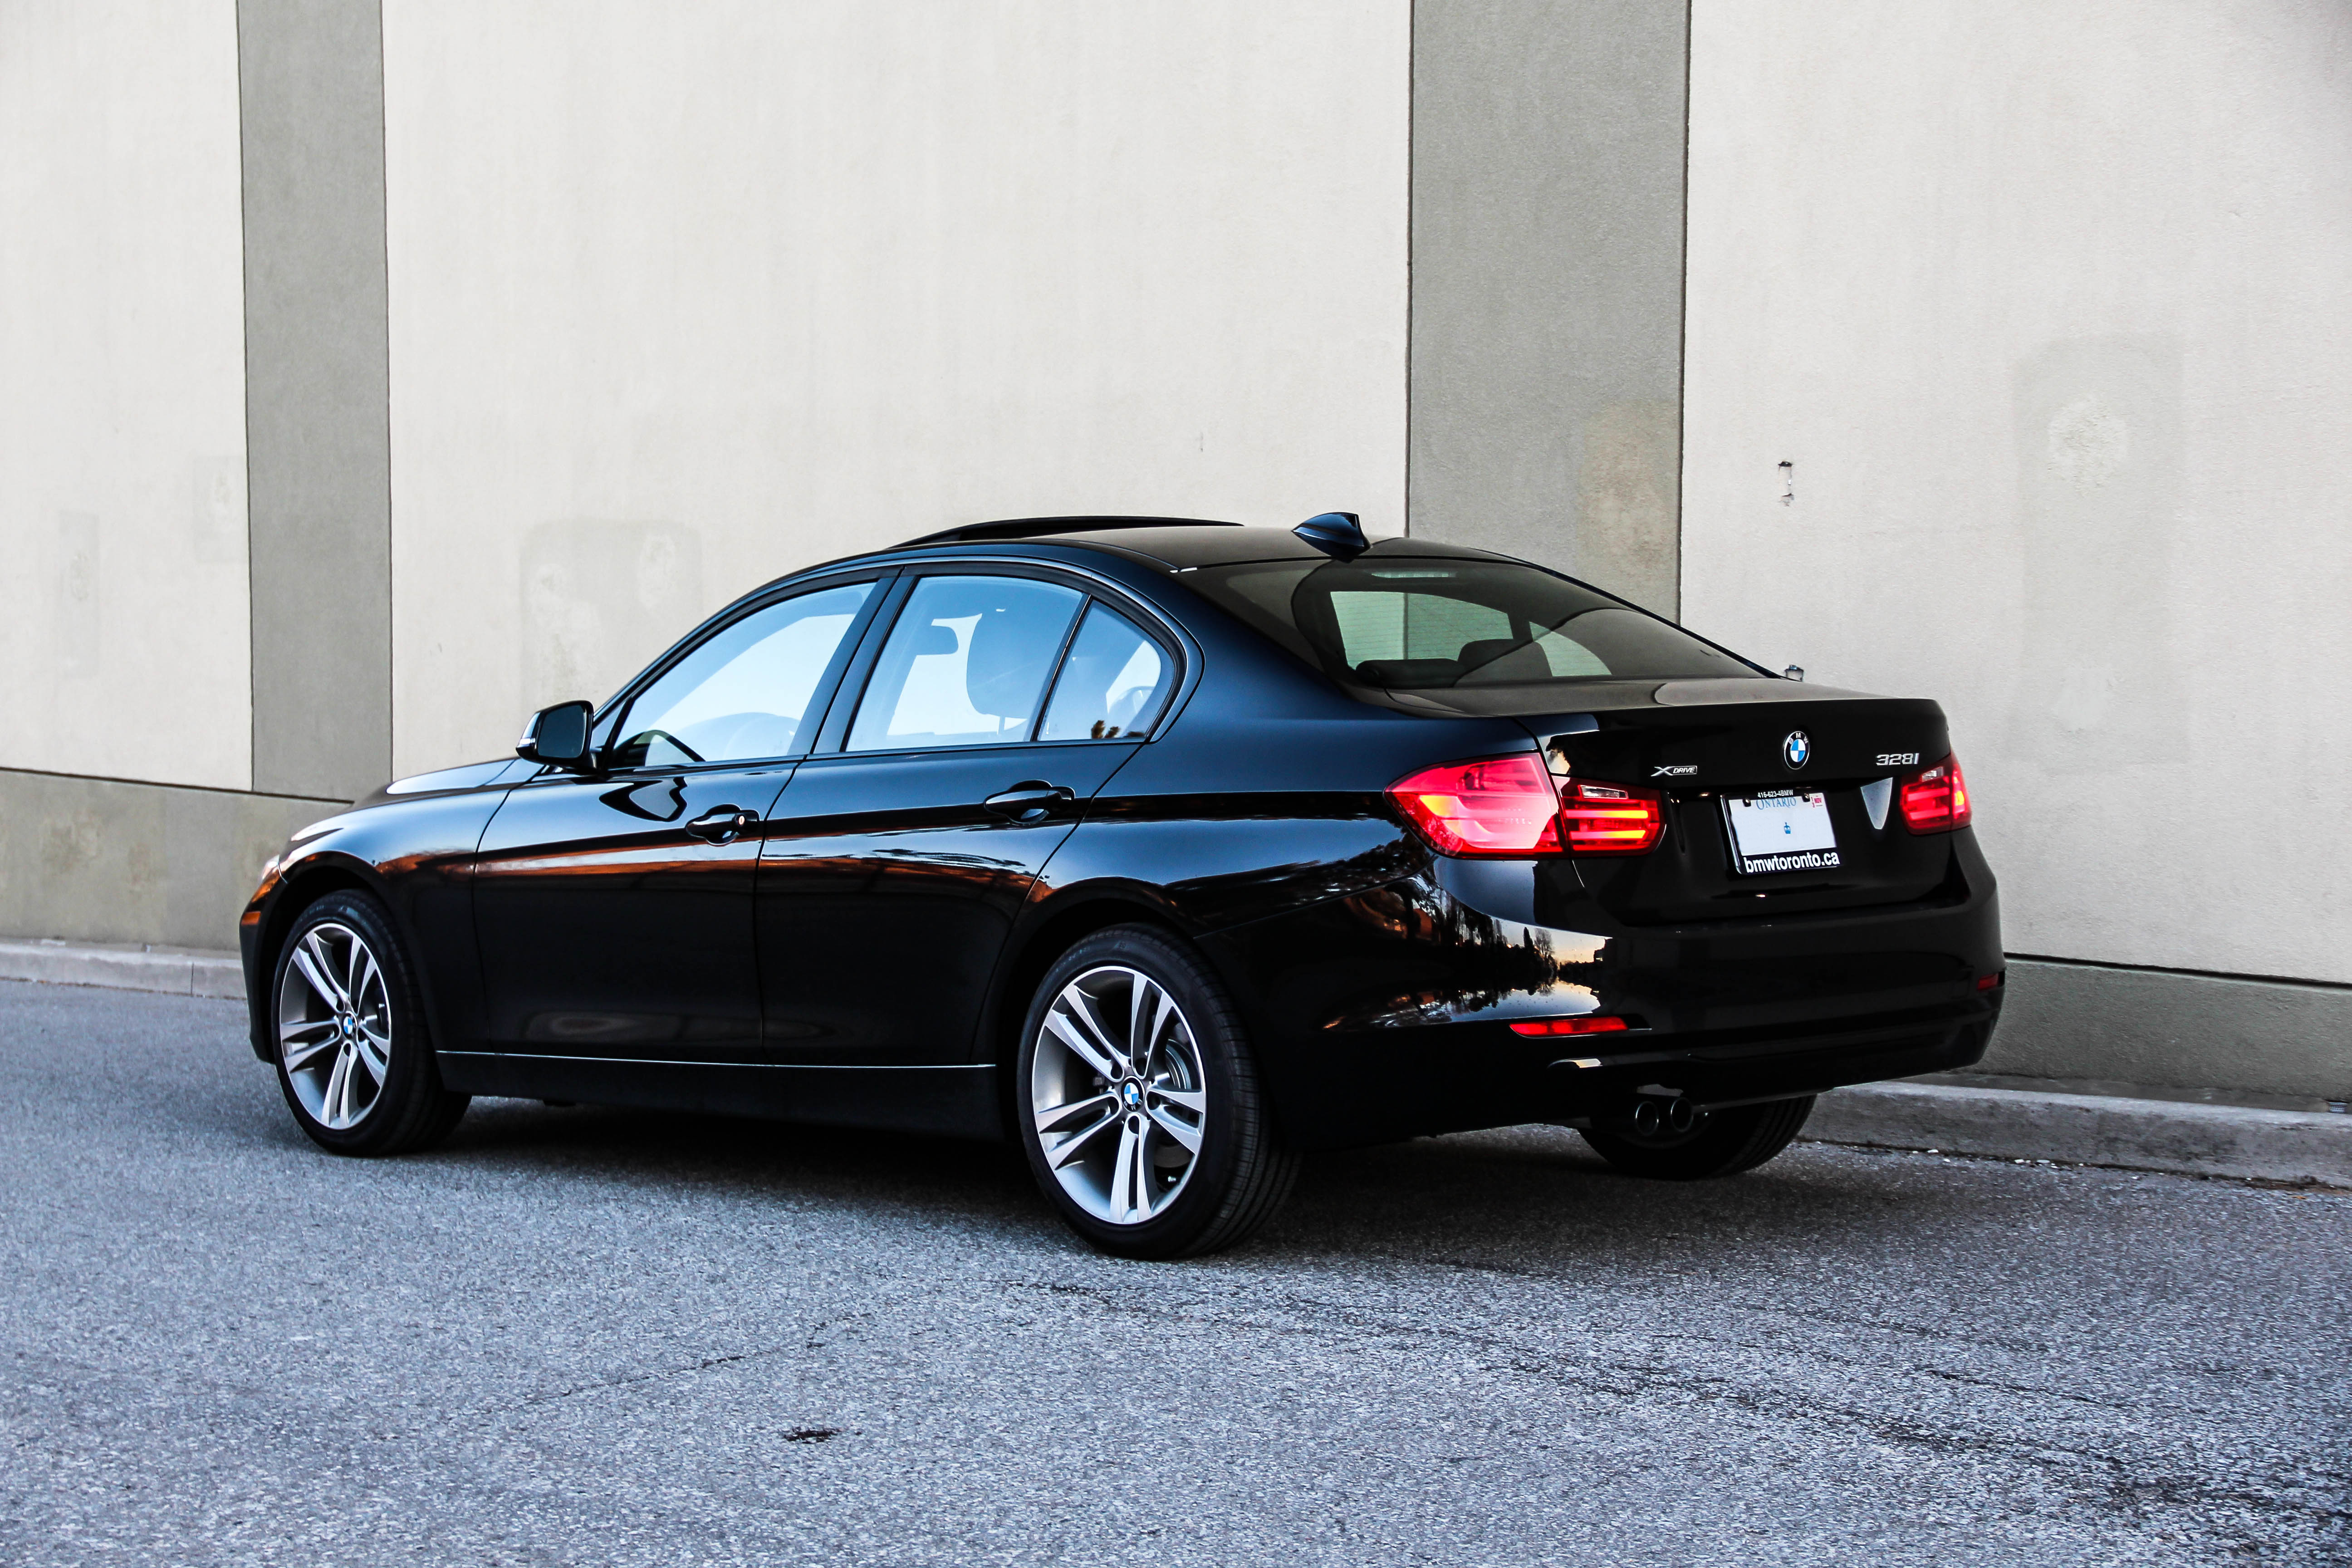 BMW 328i 2014 Review Amazing Pictures and Images Look at the car